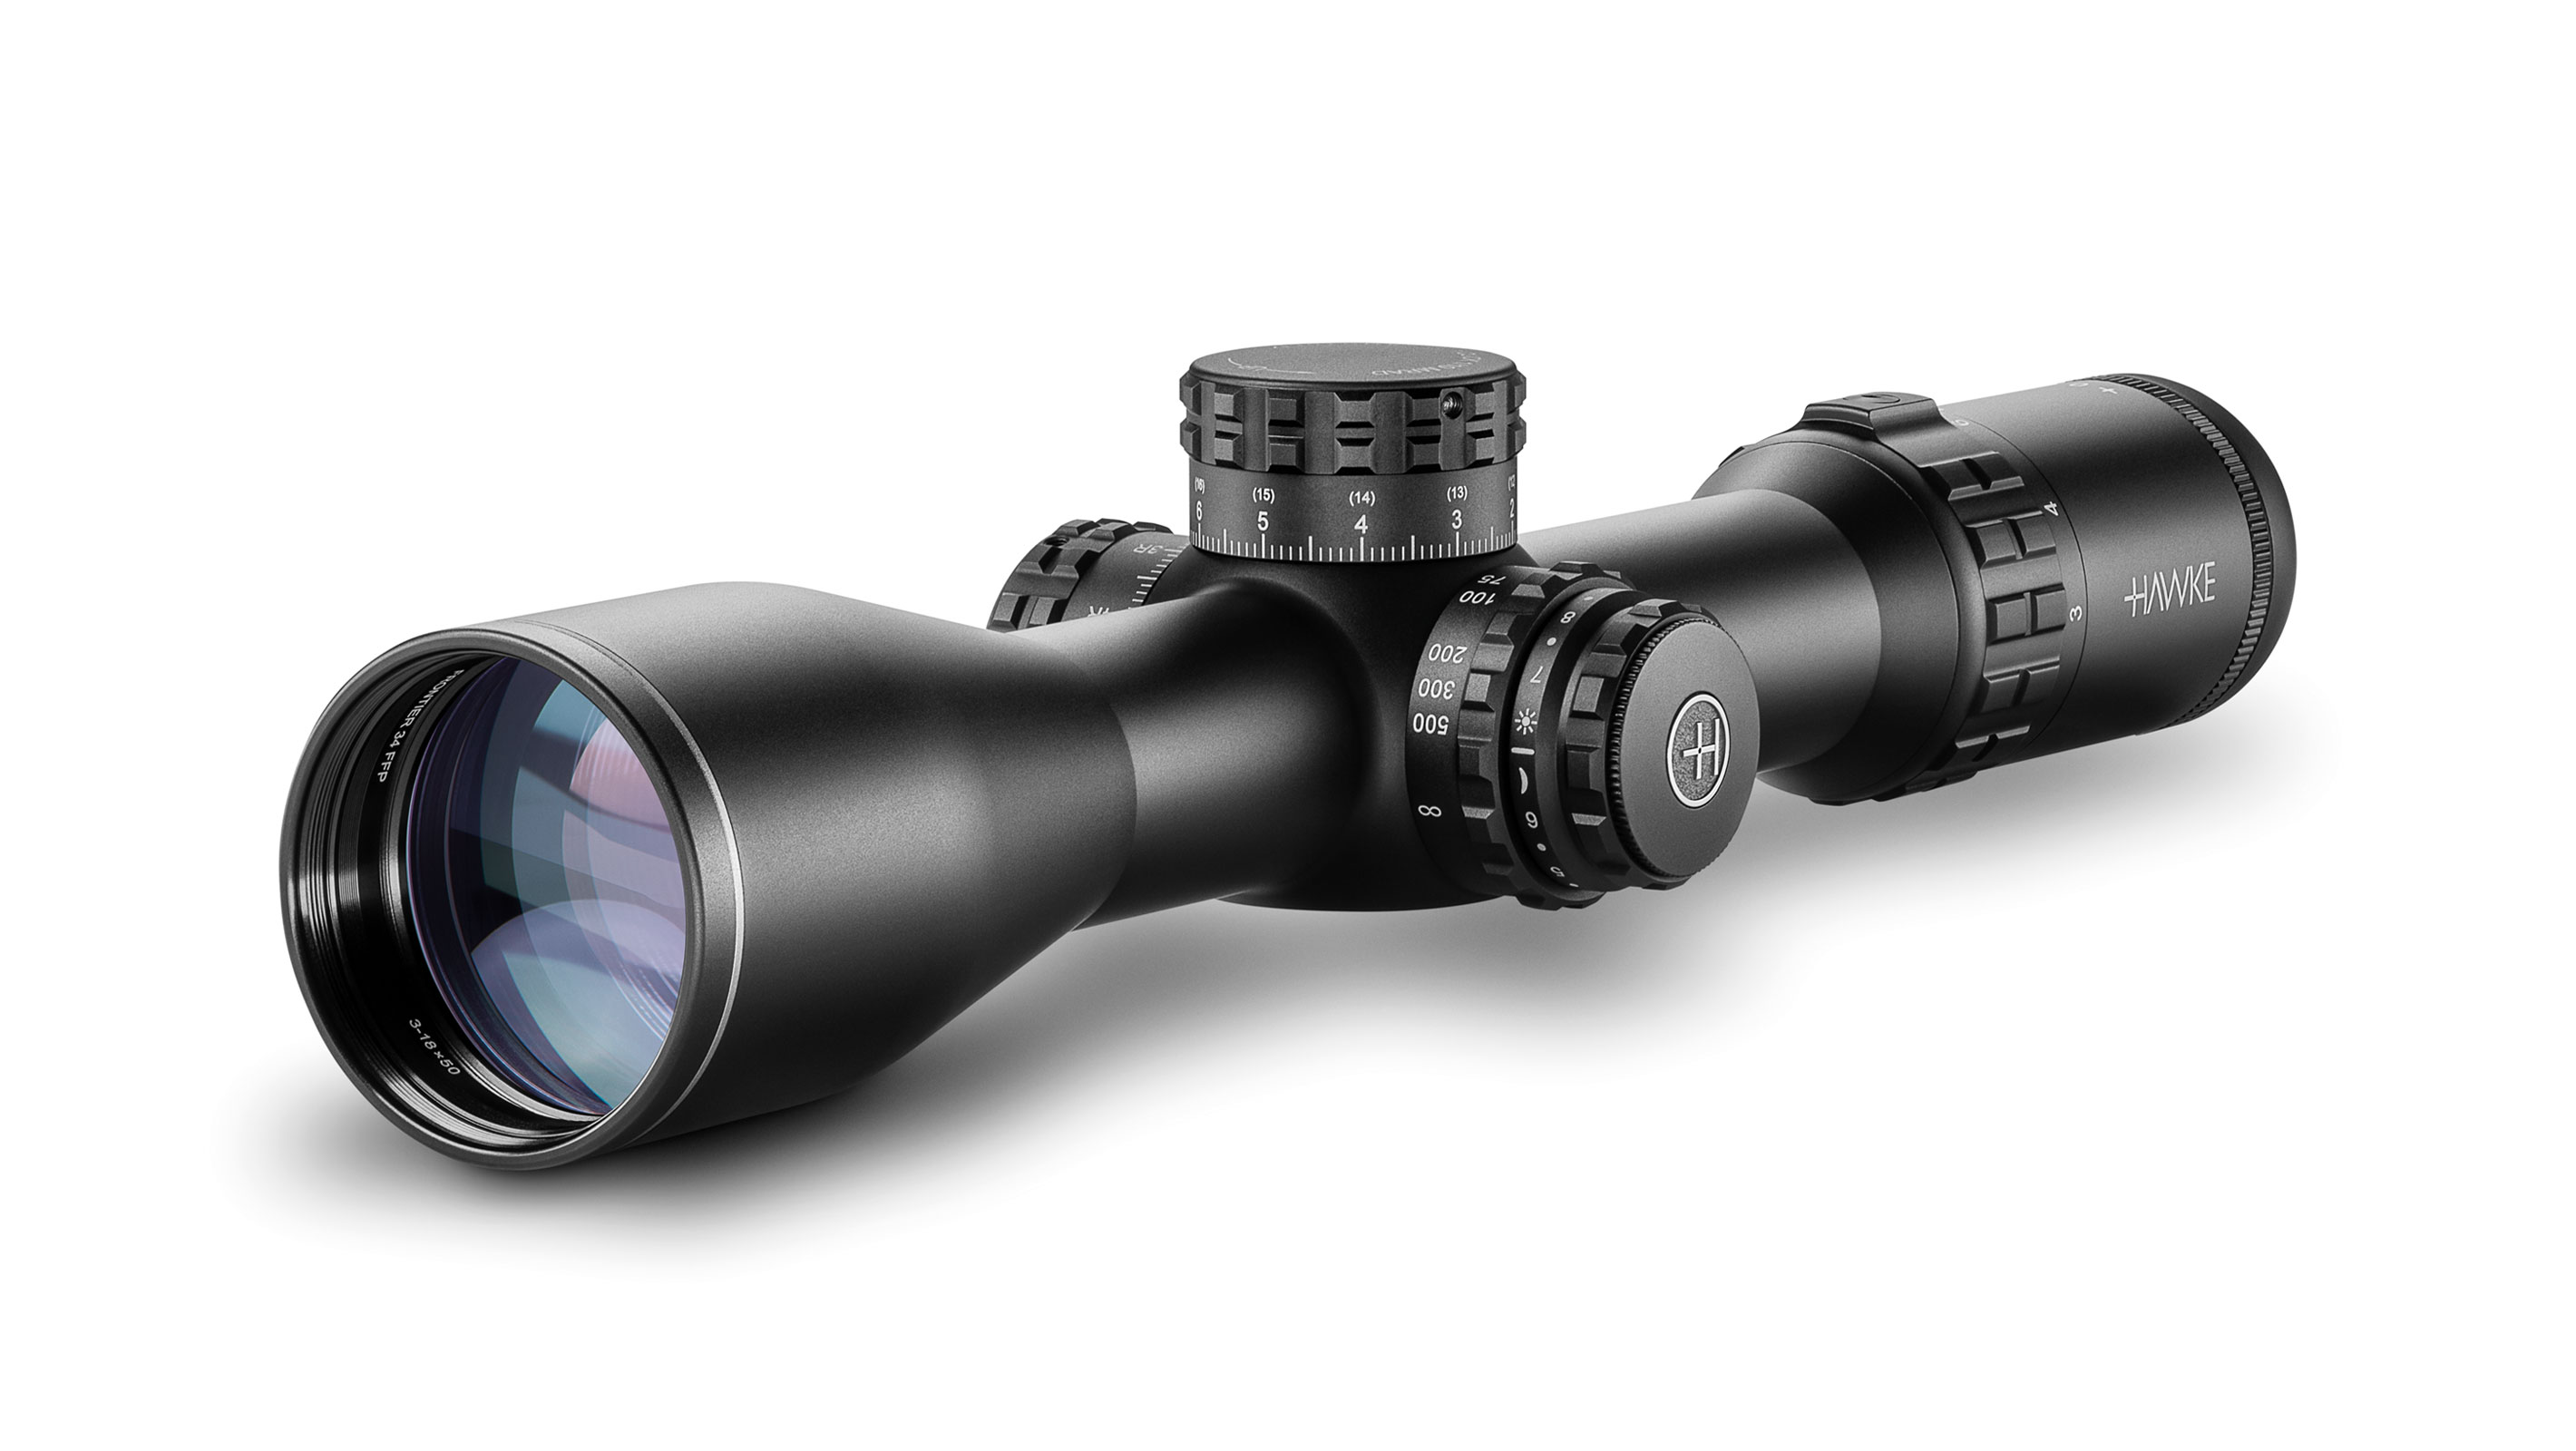 Objective End View Of The Hawke Frontier 34 FFP 3-18x50 Mil Pro Ext Rifle Scope